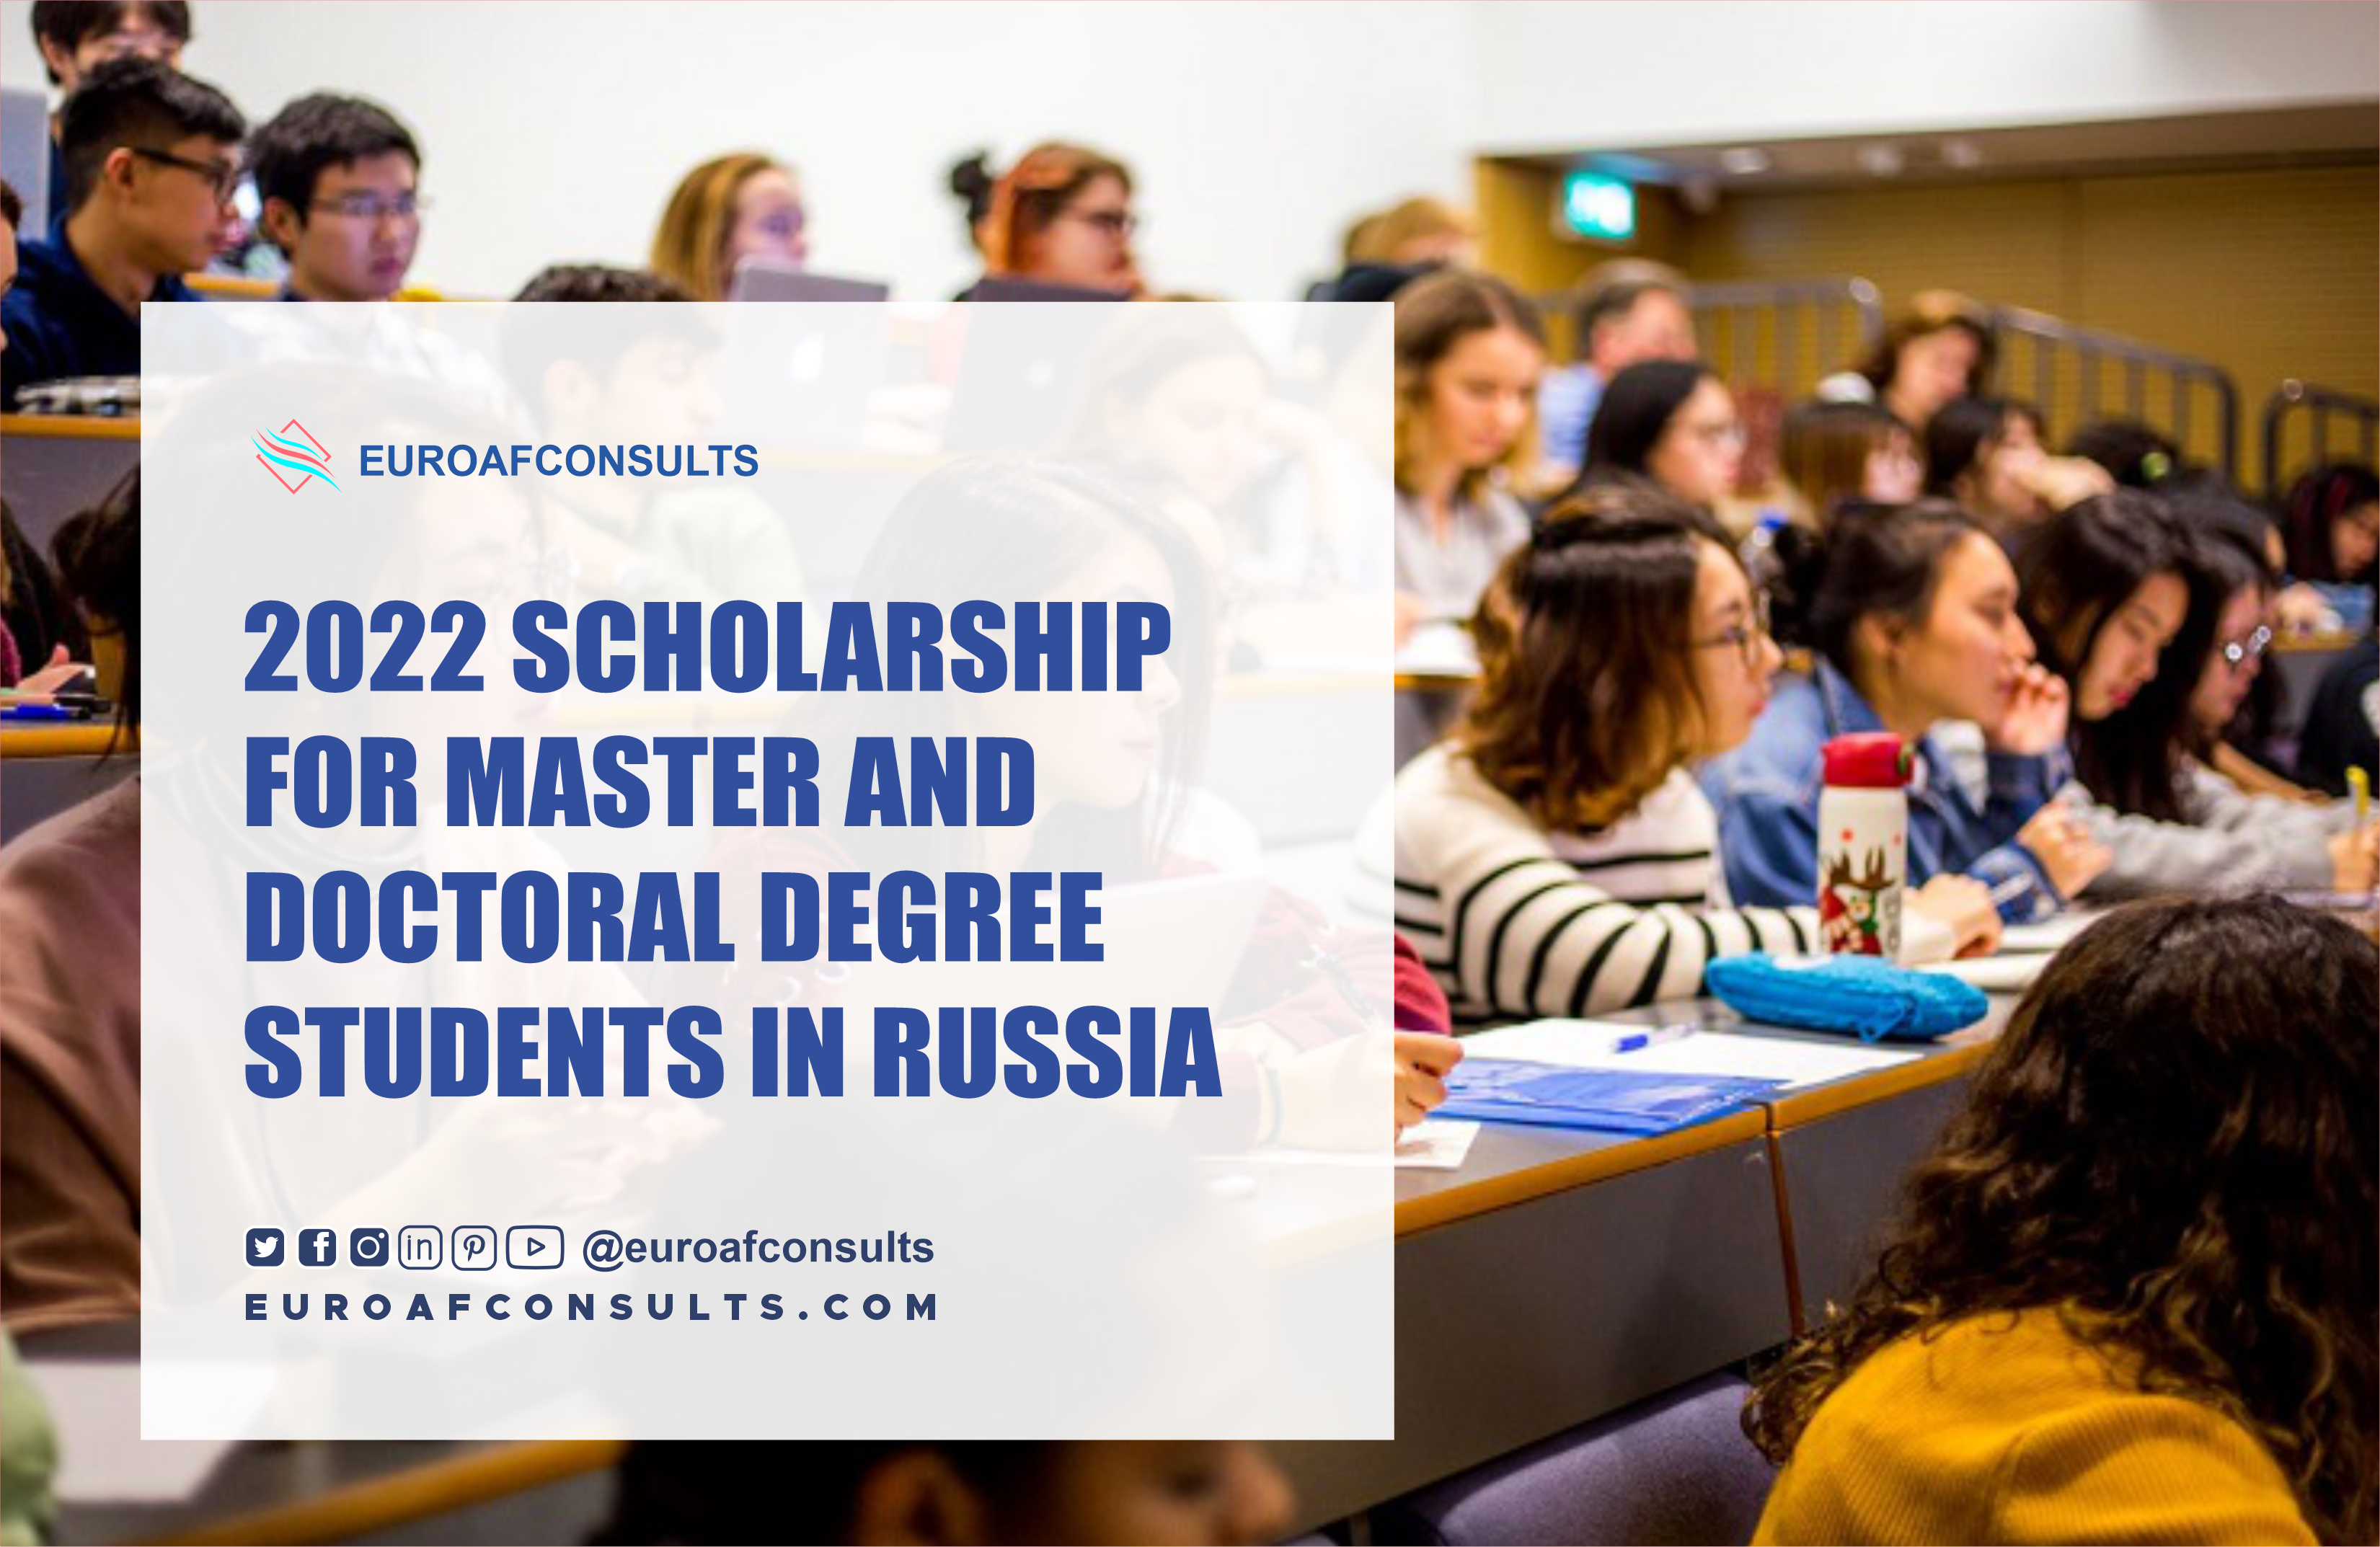 You are currently viewing 2022 SCHOLARSHIP FOR MASTER AND DOCTORAL DEGREE STUDENTS IN RUSSIA